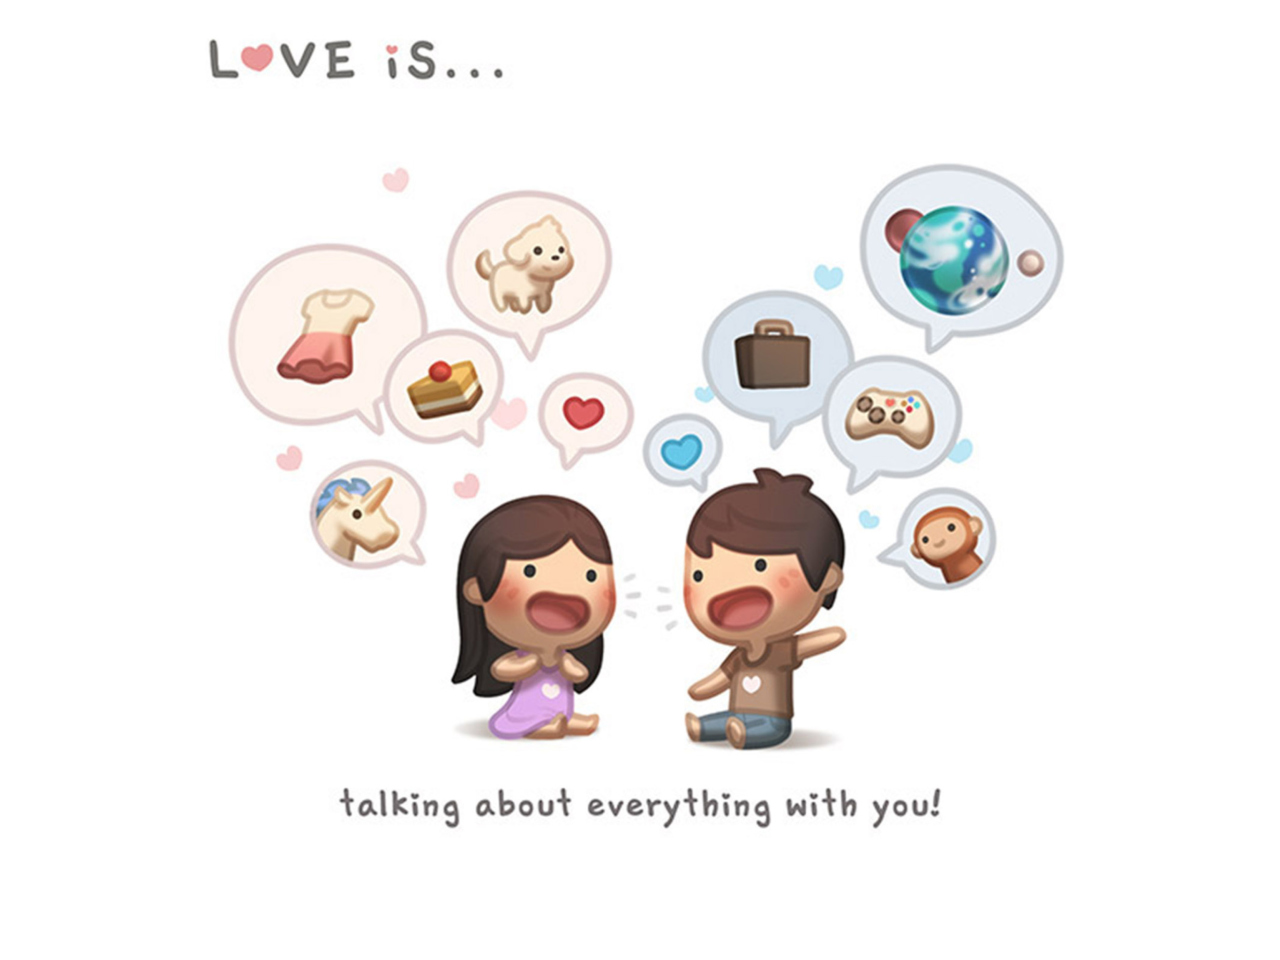 Das Love Is - Talking About Everything With You Wallpaper 1280x960